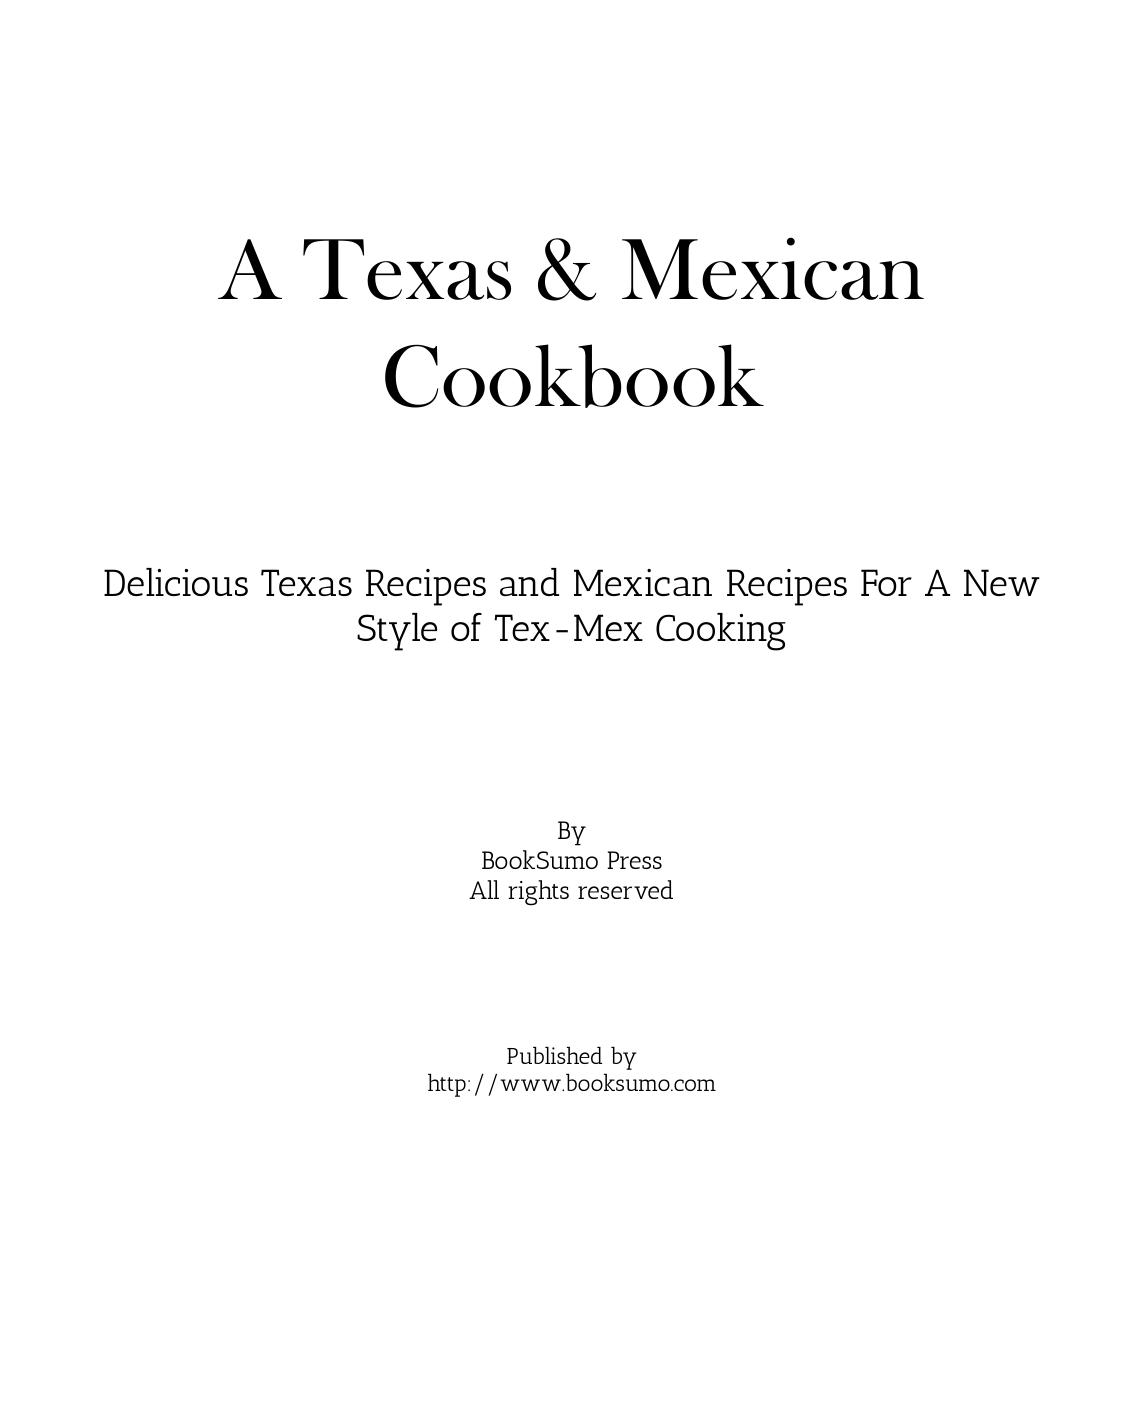 A Texas & Mexican Cookbook: Delicious Texas Recipes and Mexican Recipes for a New Style of Mesa Cooking by BookSumo Press